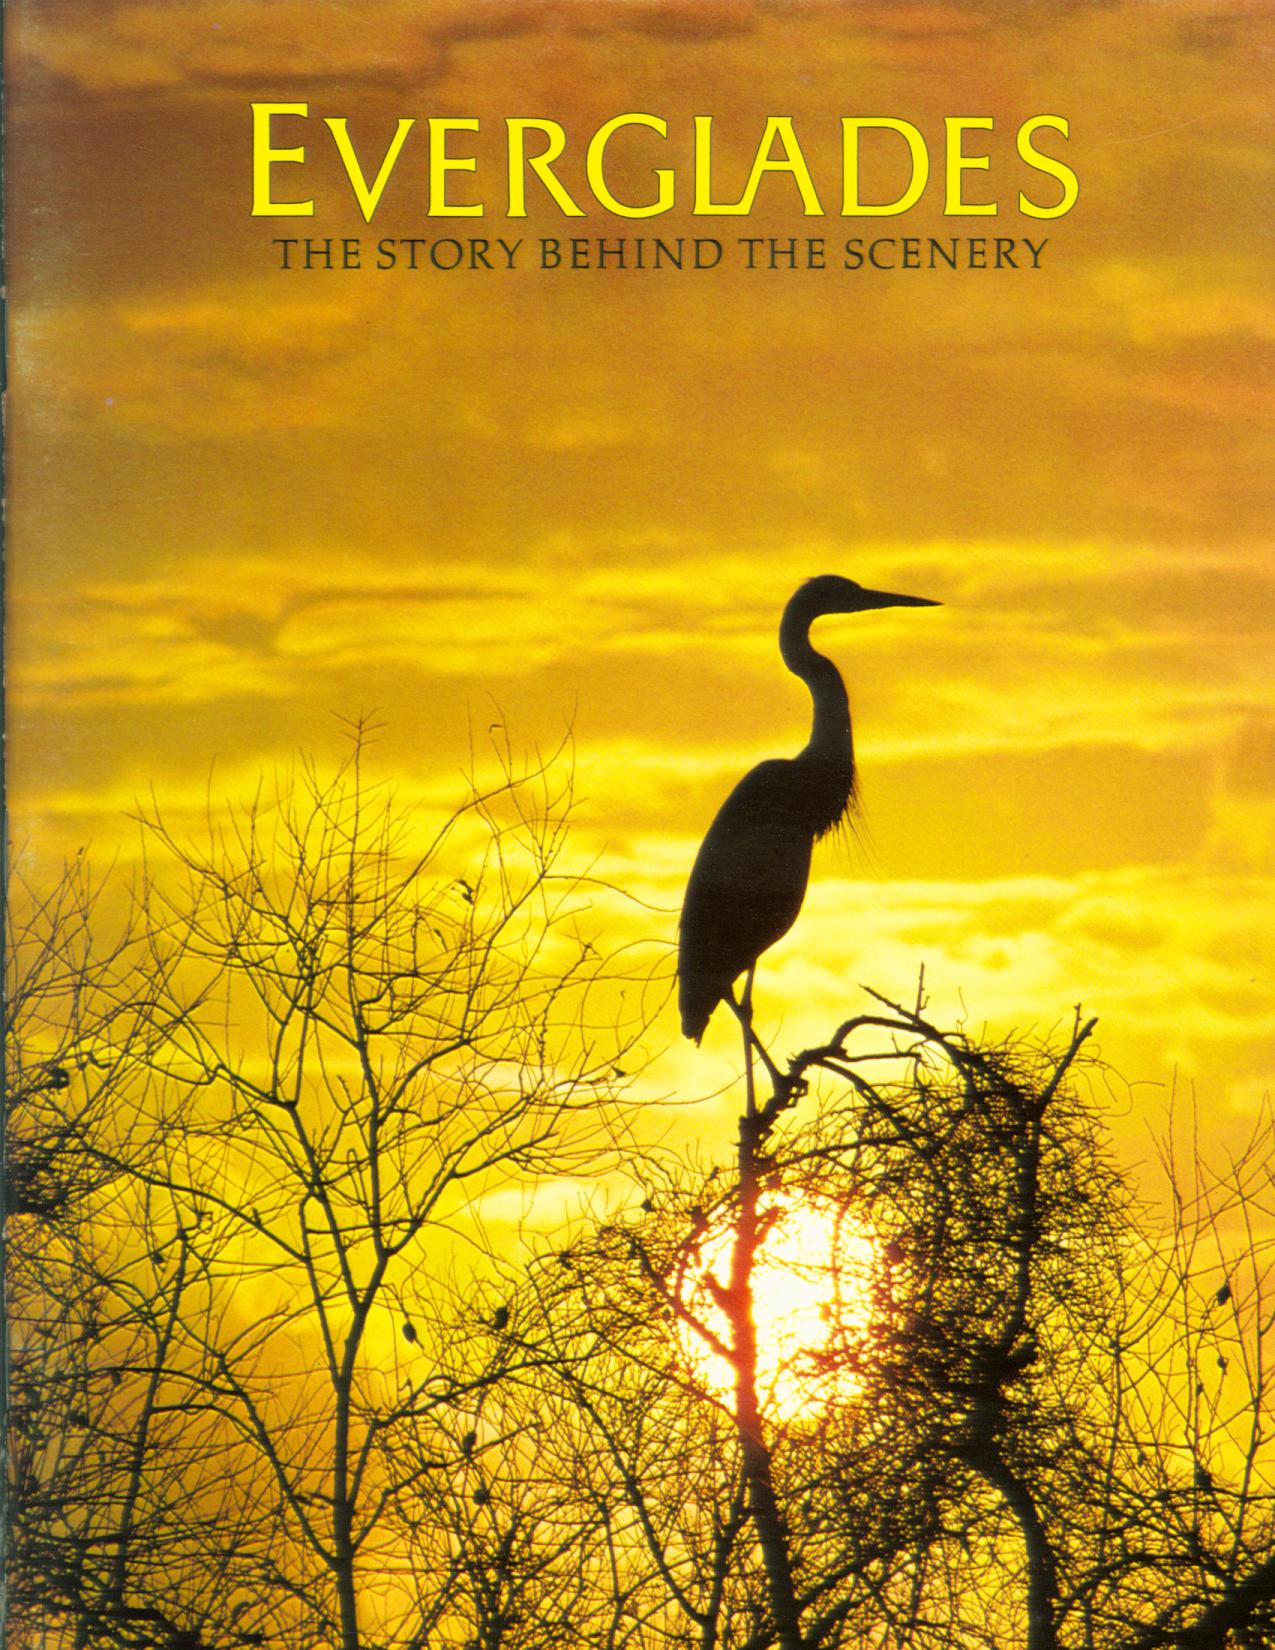 EVERGLADES: the story behind the scenery(FL).